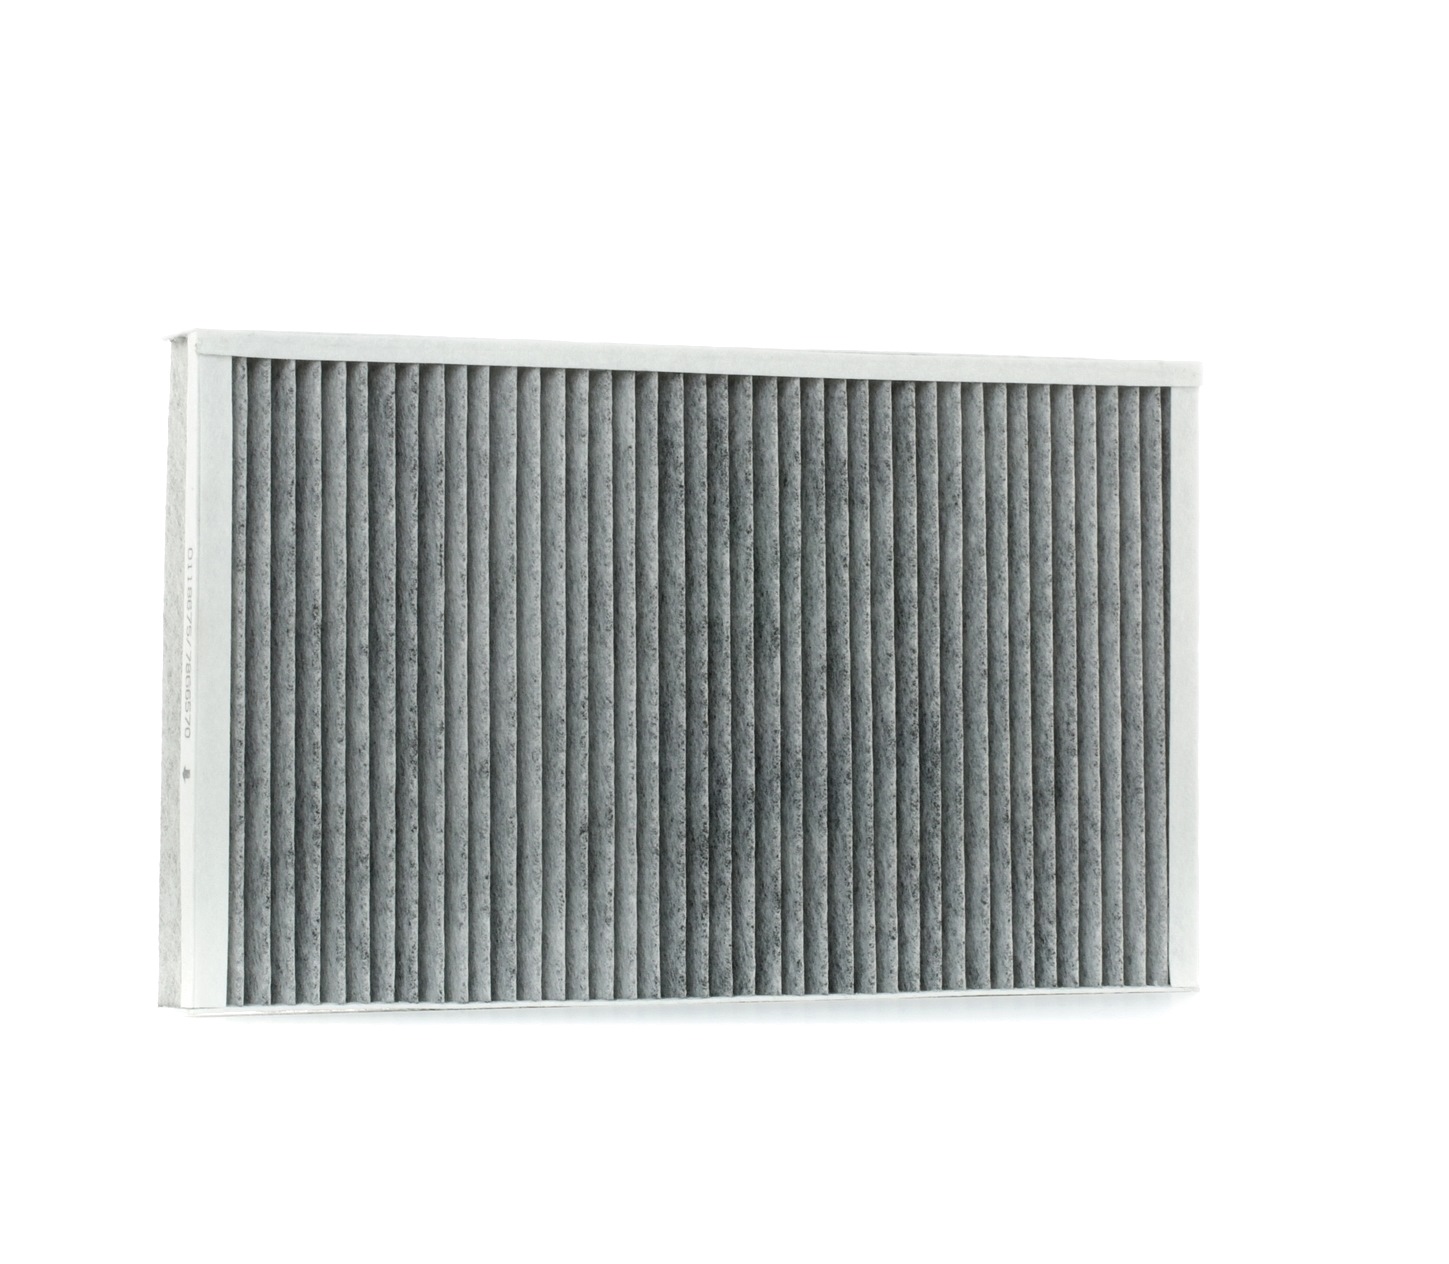 STARK Activated Carbon Filter, 350 mm x 206 mm x 33 mm Width: 206mm, Height: 33mm, Length: 350mm Cabin filter SKIF-0170077 buy